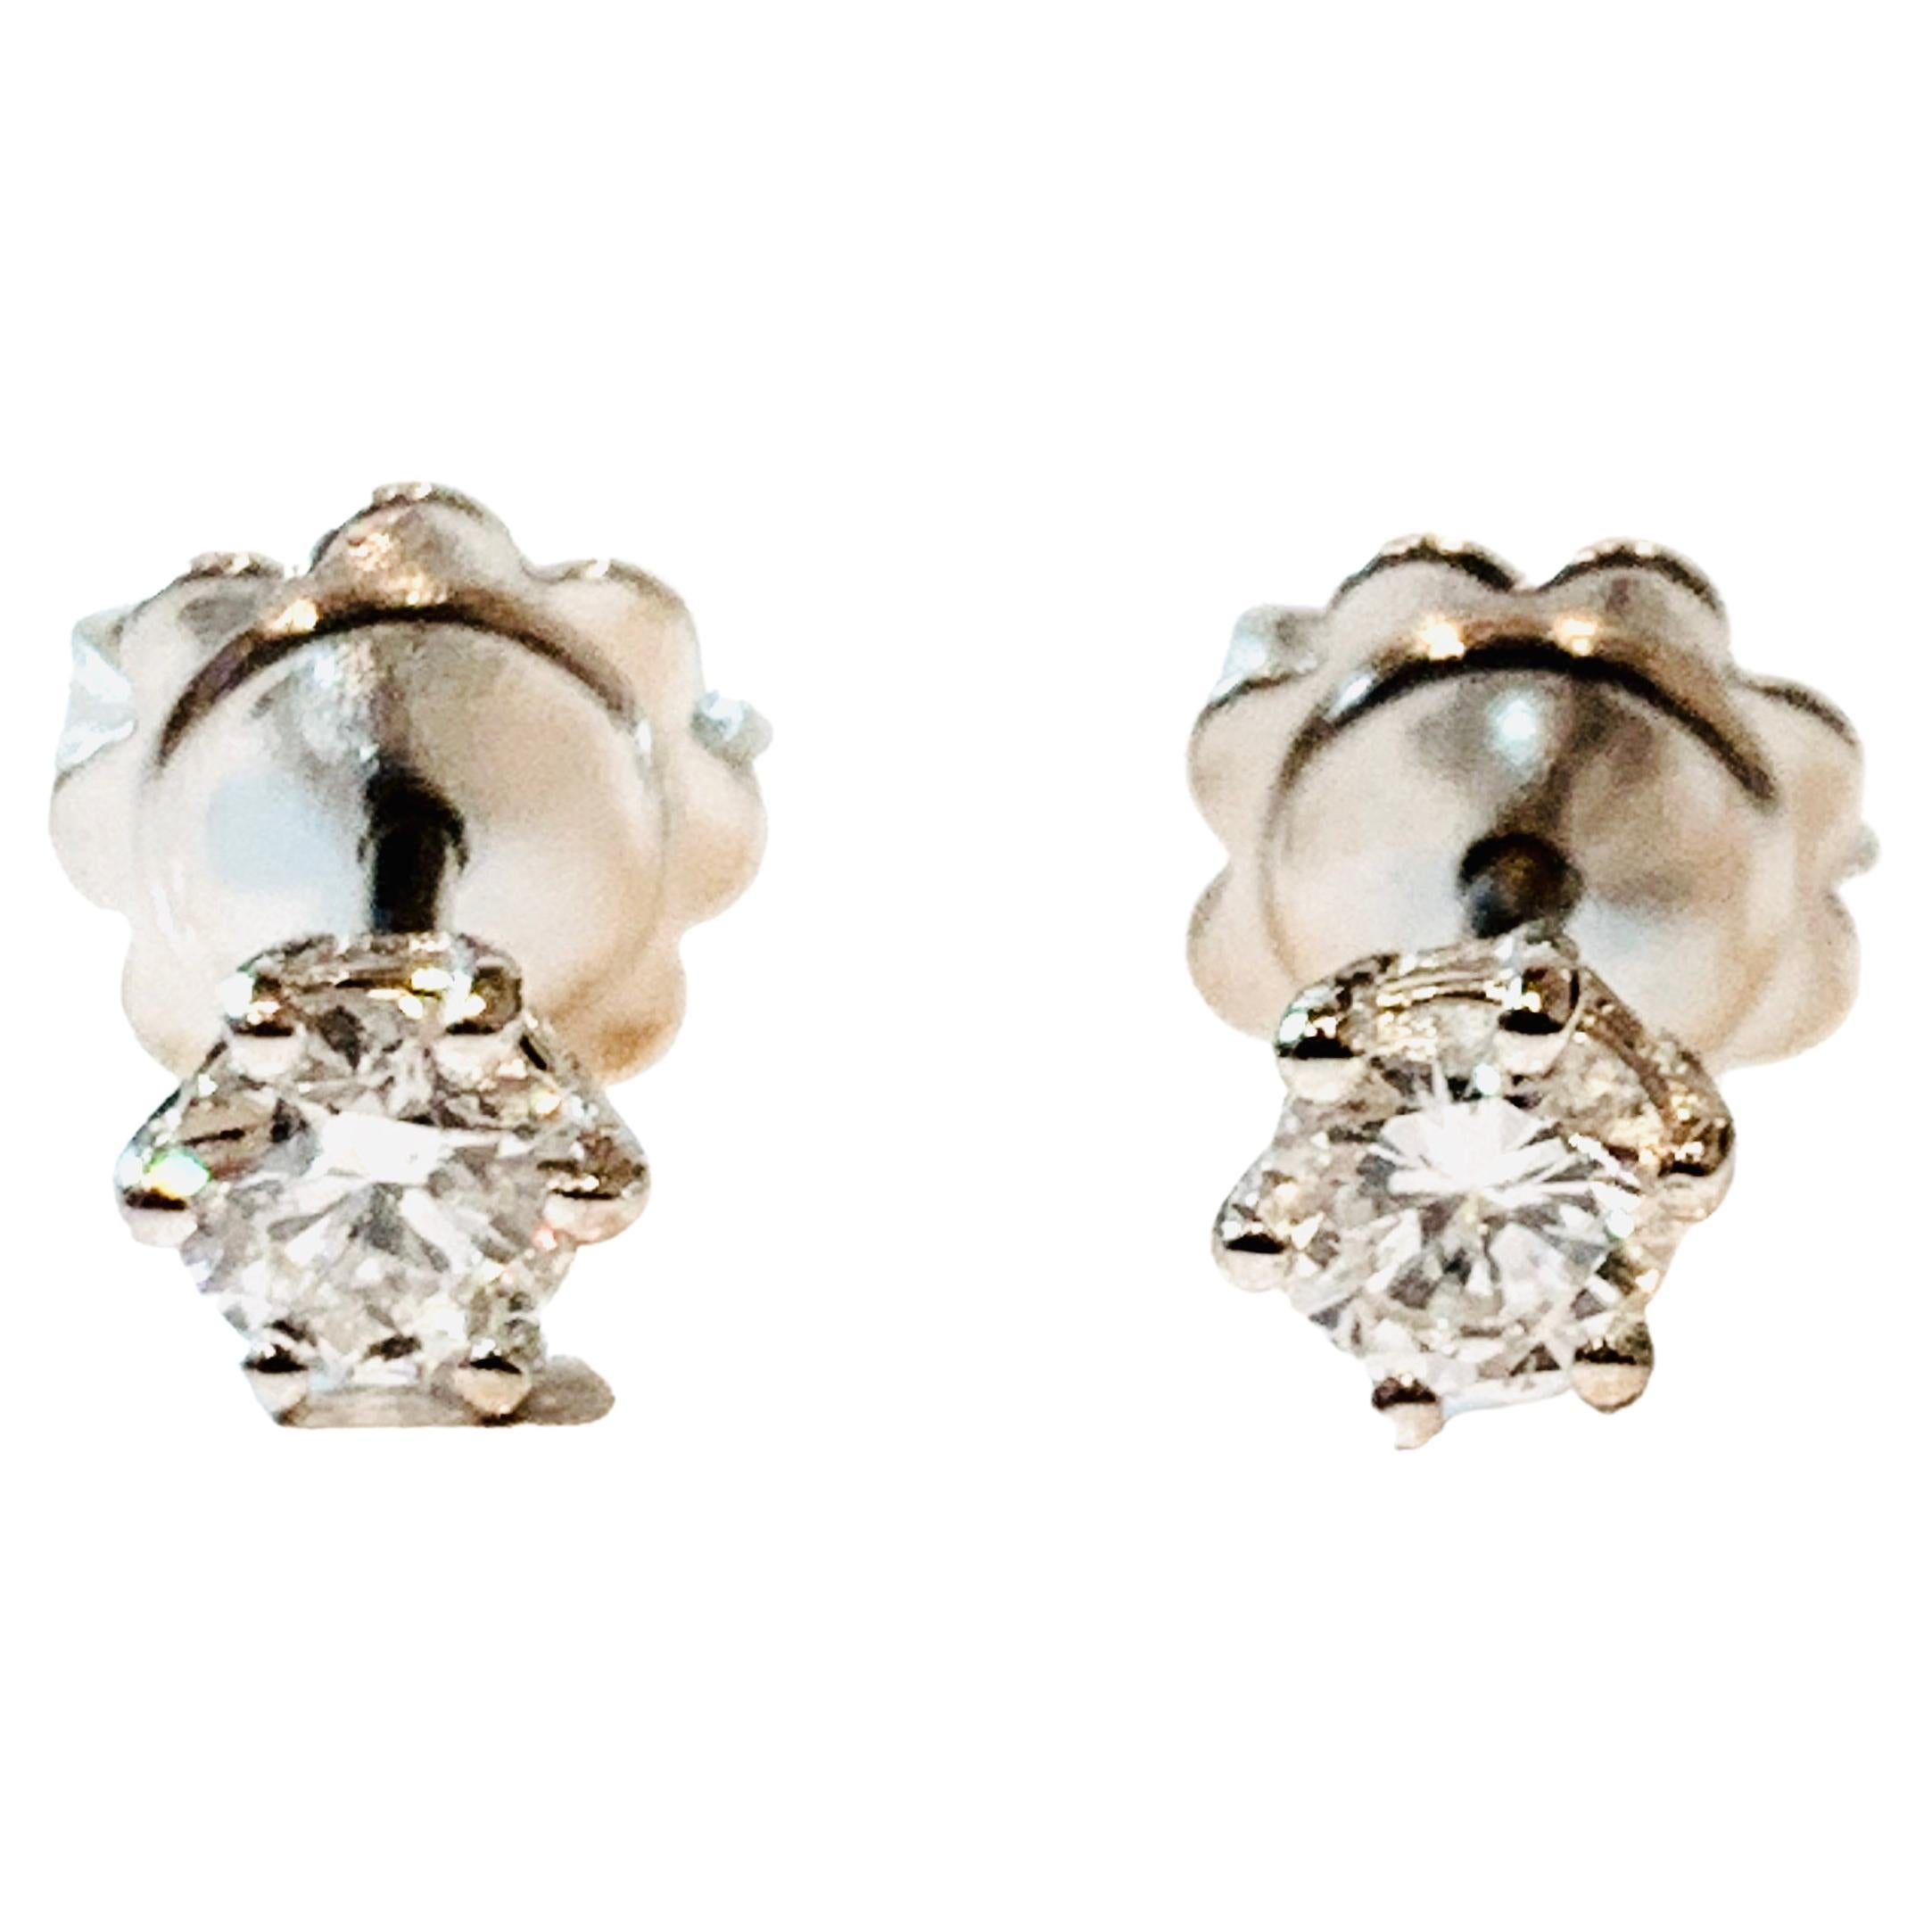 These certified 0.48 carat Diamond stud earrings are from the HRD Antwerp Star collection. 

Designed with the Diamond nestled within a 5 pointed 18Kt white Gold star and secured on the ear with butterfly back closures. 

High quality natural